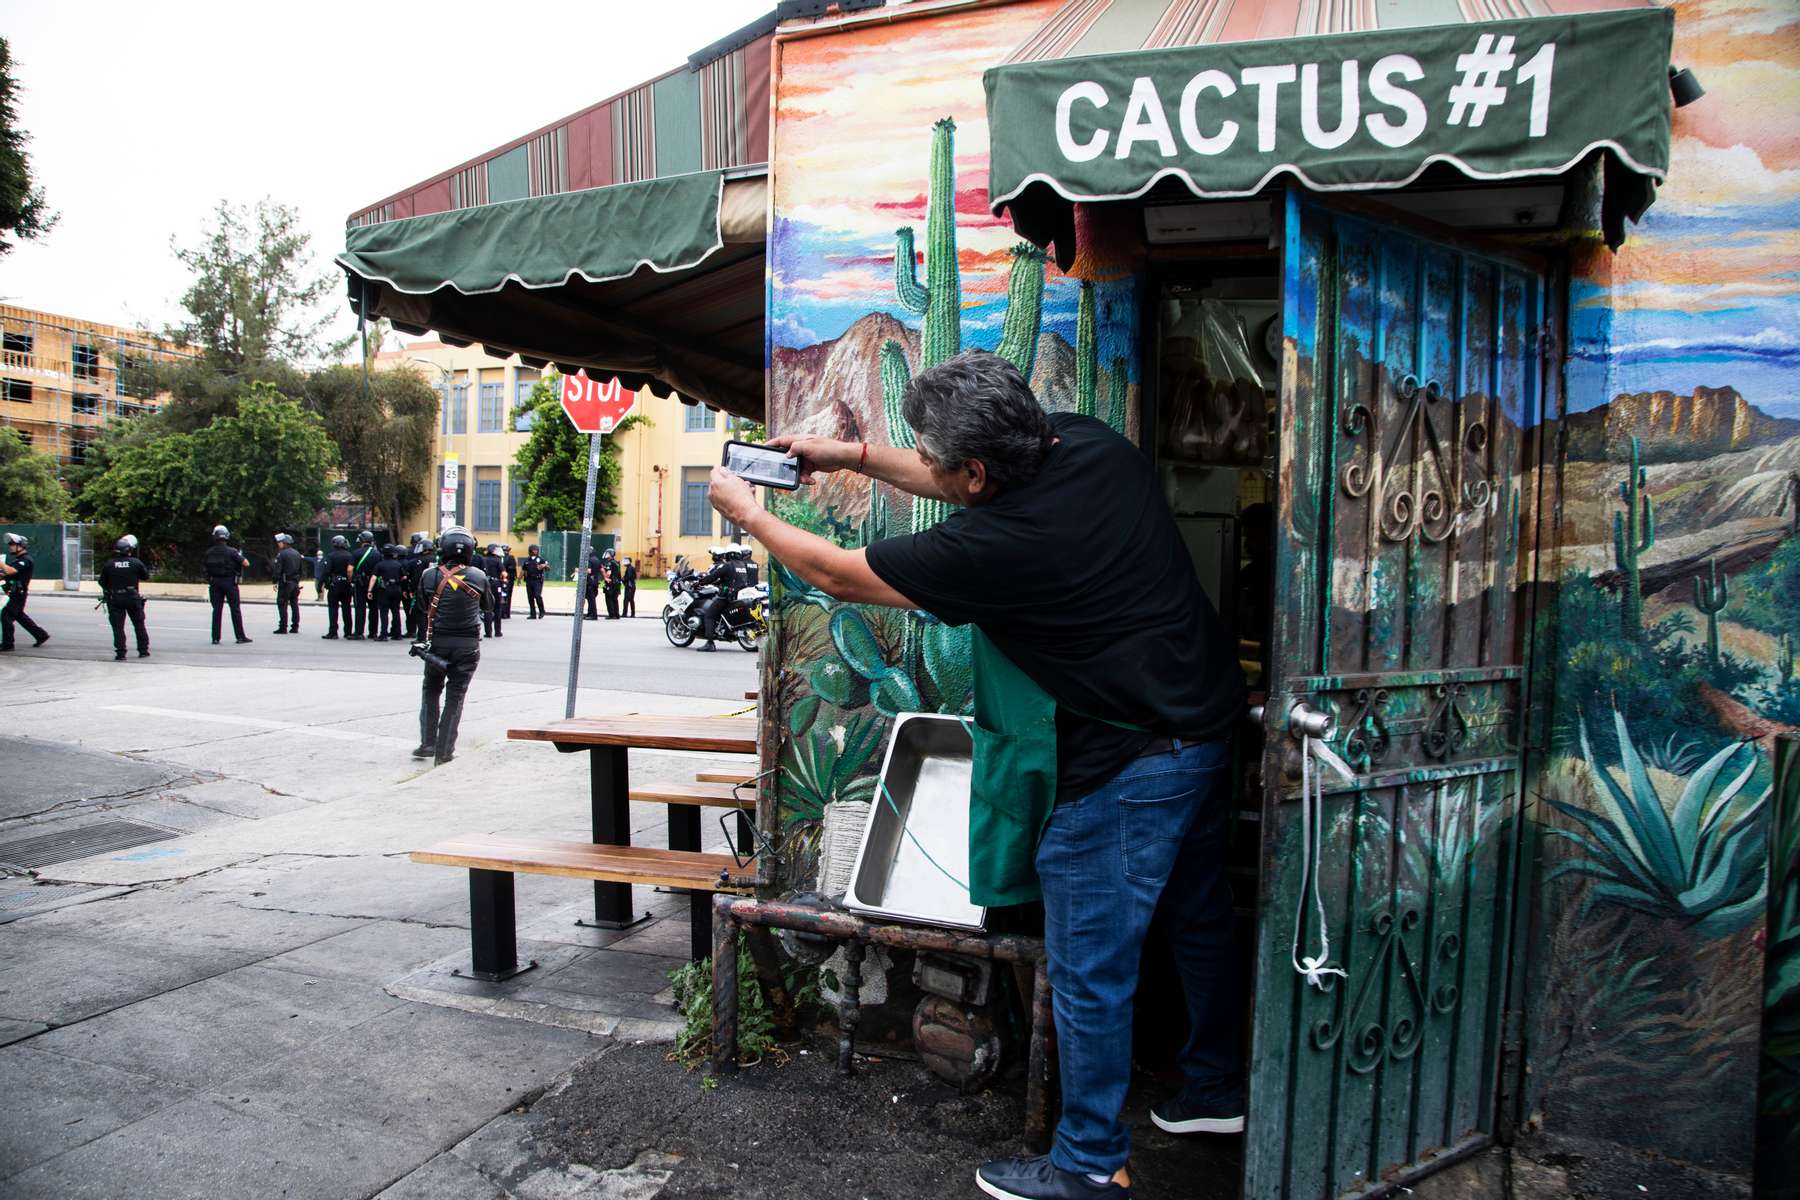 A man get out of his store briefly to take pictures of police arriving to enforce curfew over protesters  during a march over the death of George Floyd, an unarmed black man, who died after a police officer kneeled on his neck for several minutes, in the Hollywood neighborhood on June 1, 2020, in Los Angeles, California.